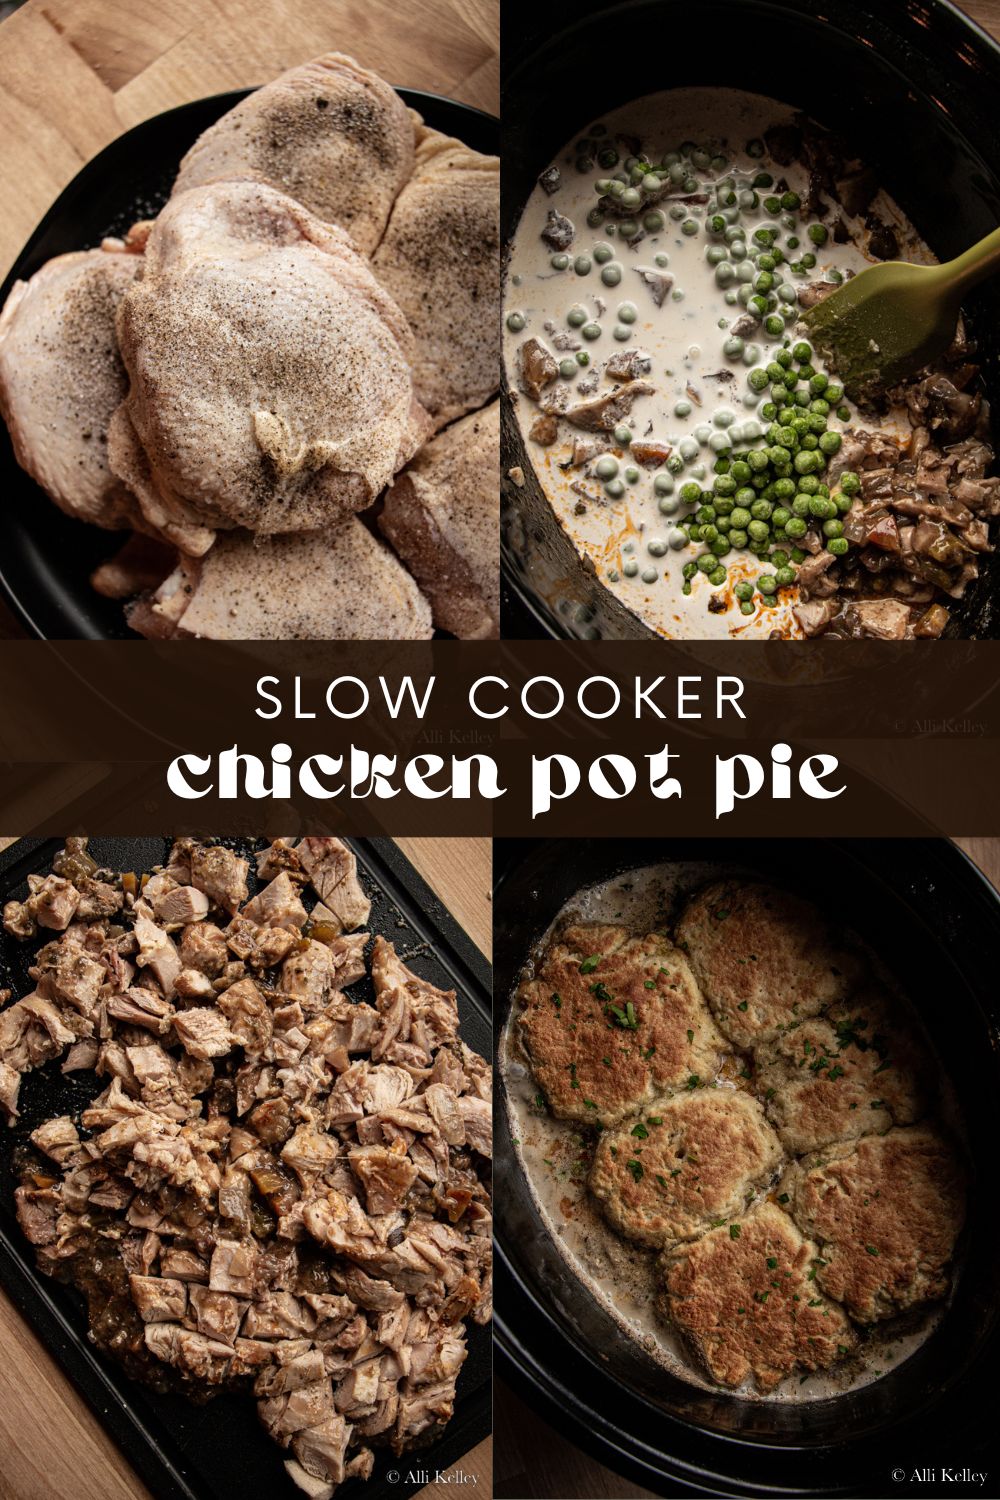 Slow cooker chicken pot pie is the perfect meal for a busy day! Comfort food made easy, it's packed with flavor and sure to be an instant family favorite.